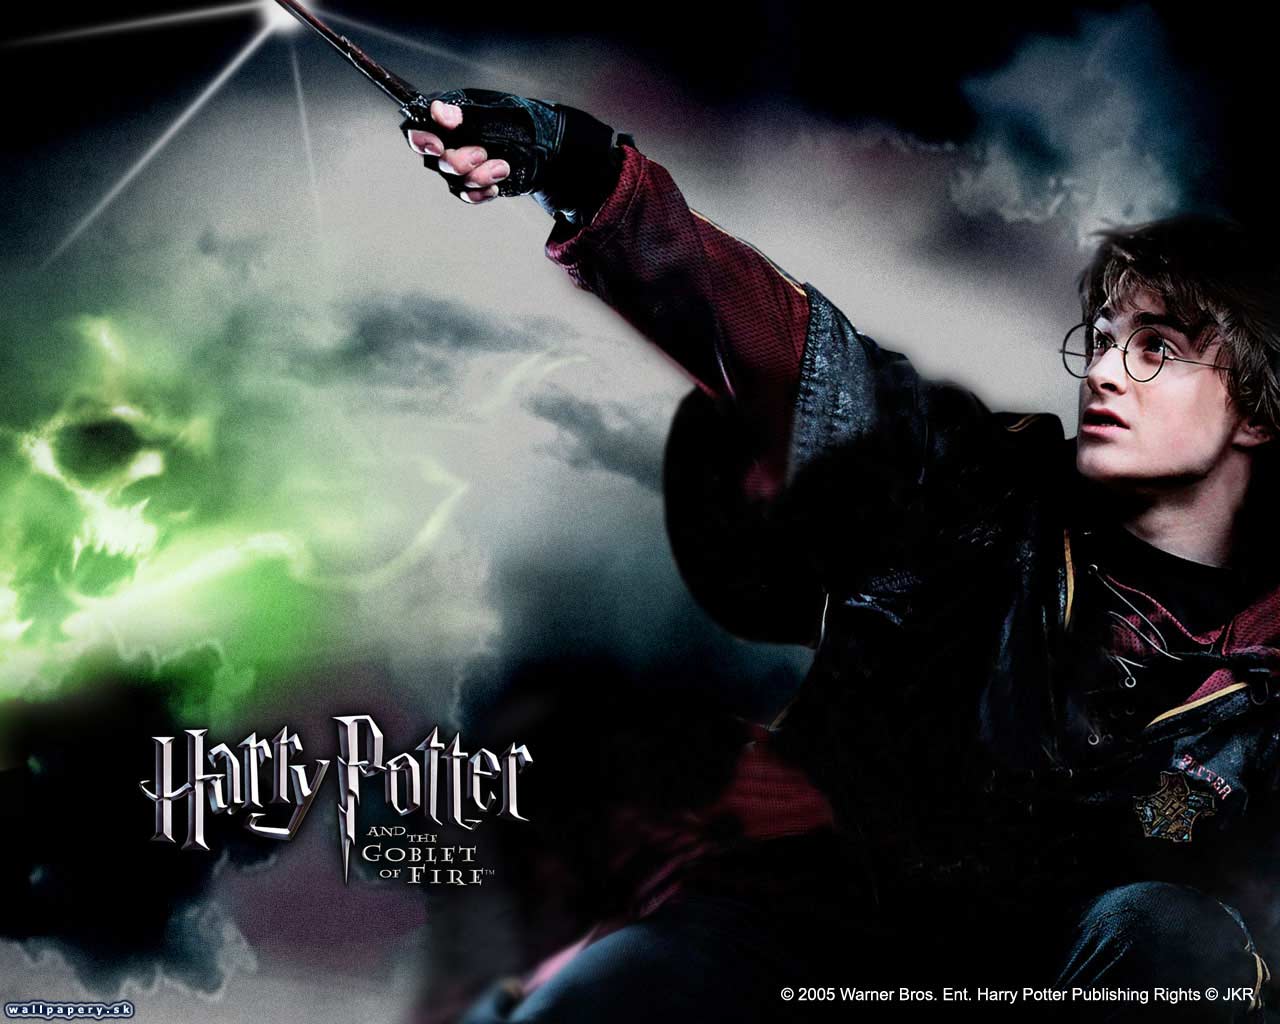 Harry Potter and the Goblet of Fire - wallpaper 8